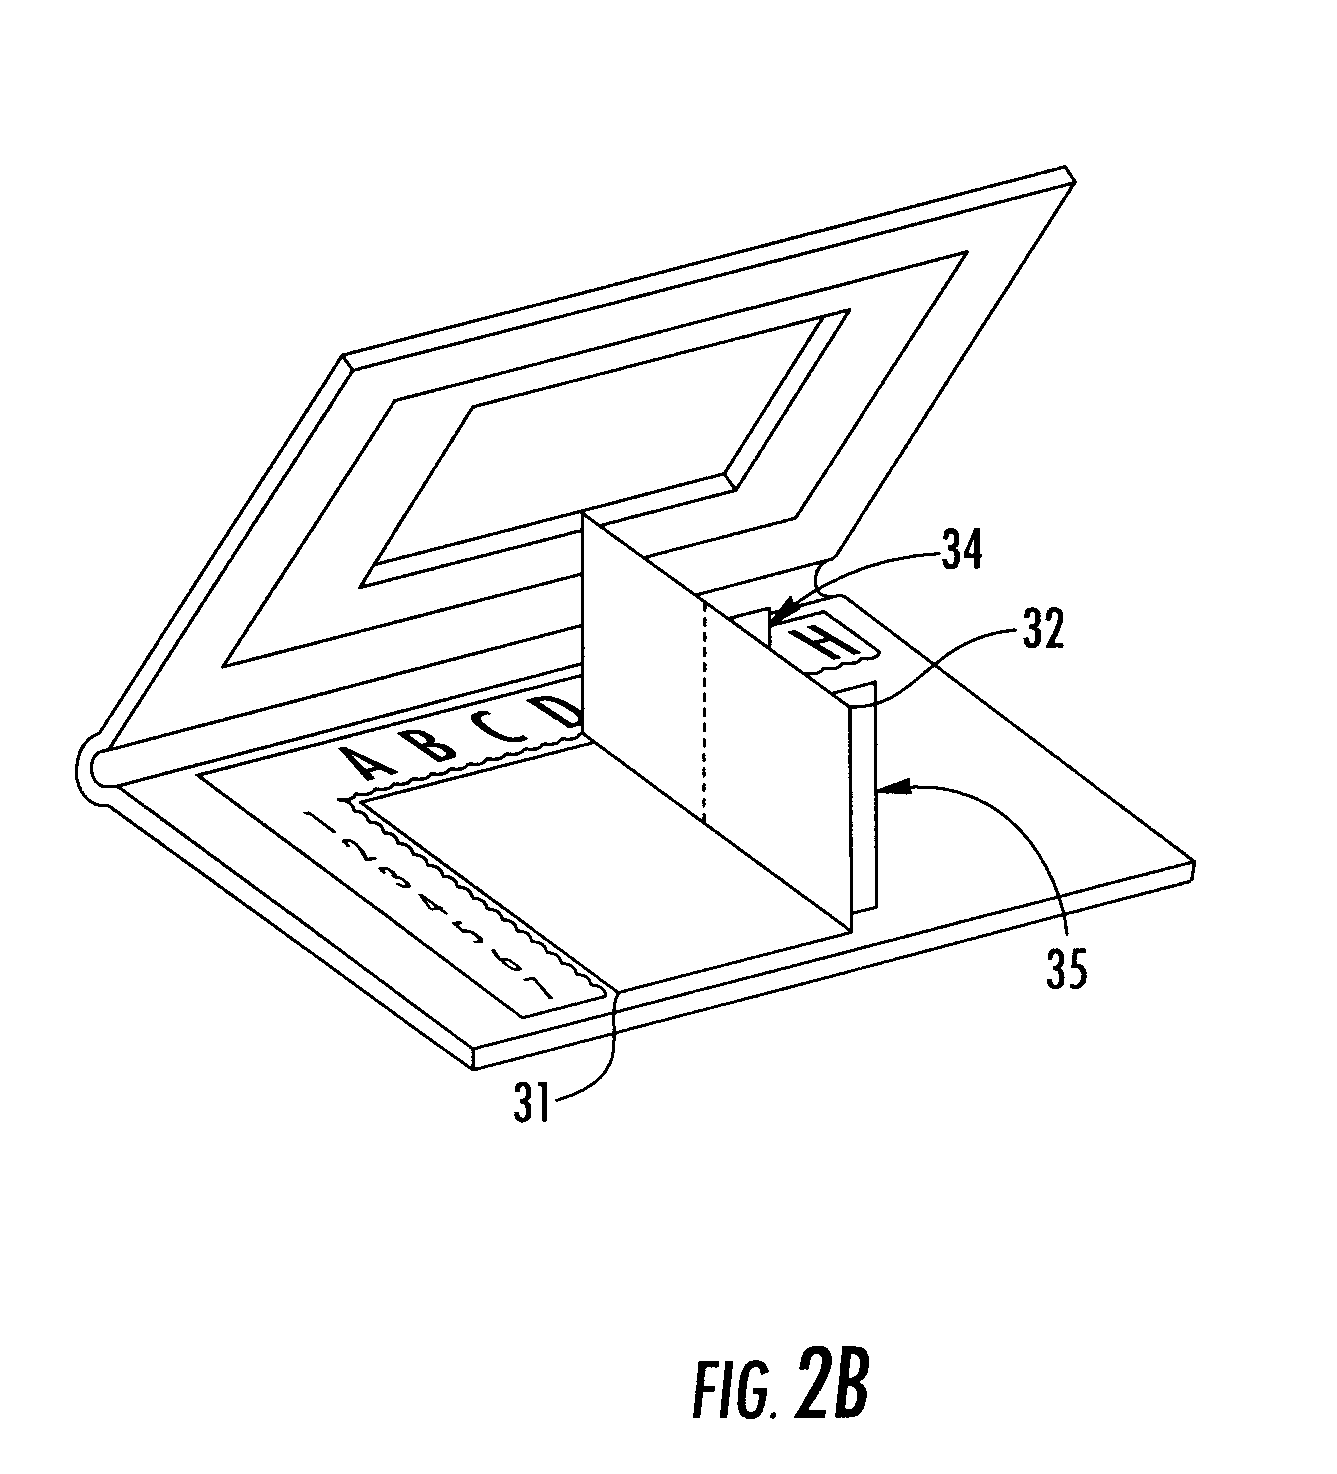 Useful specimen transport apparatus with integral capability to allow three dimensional x-ray images